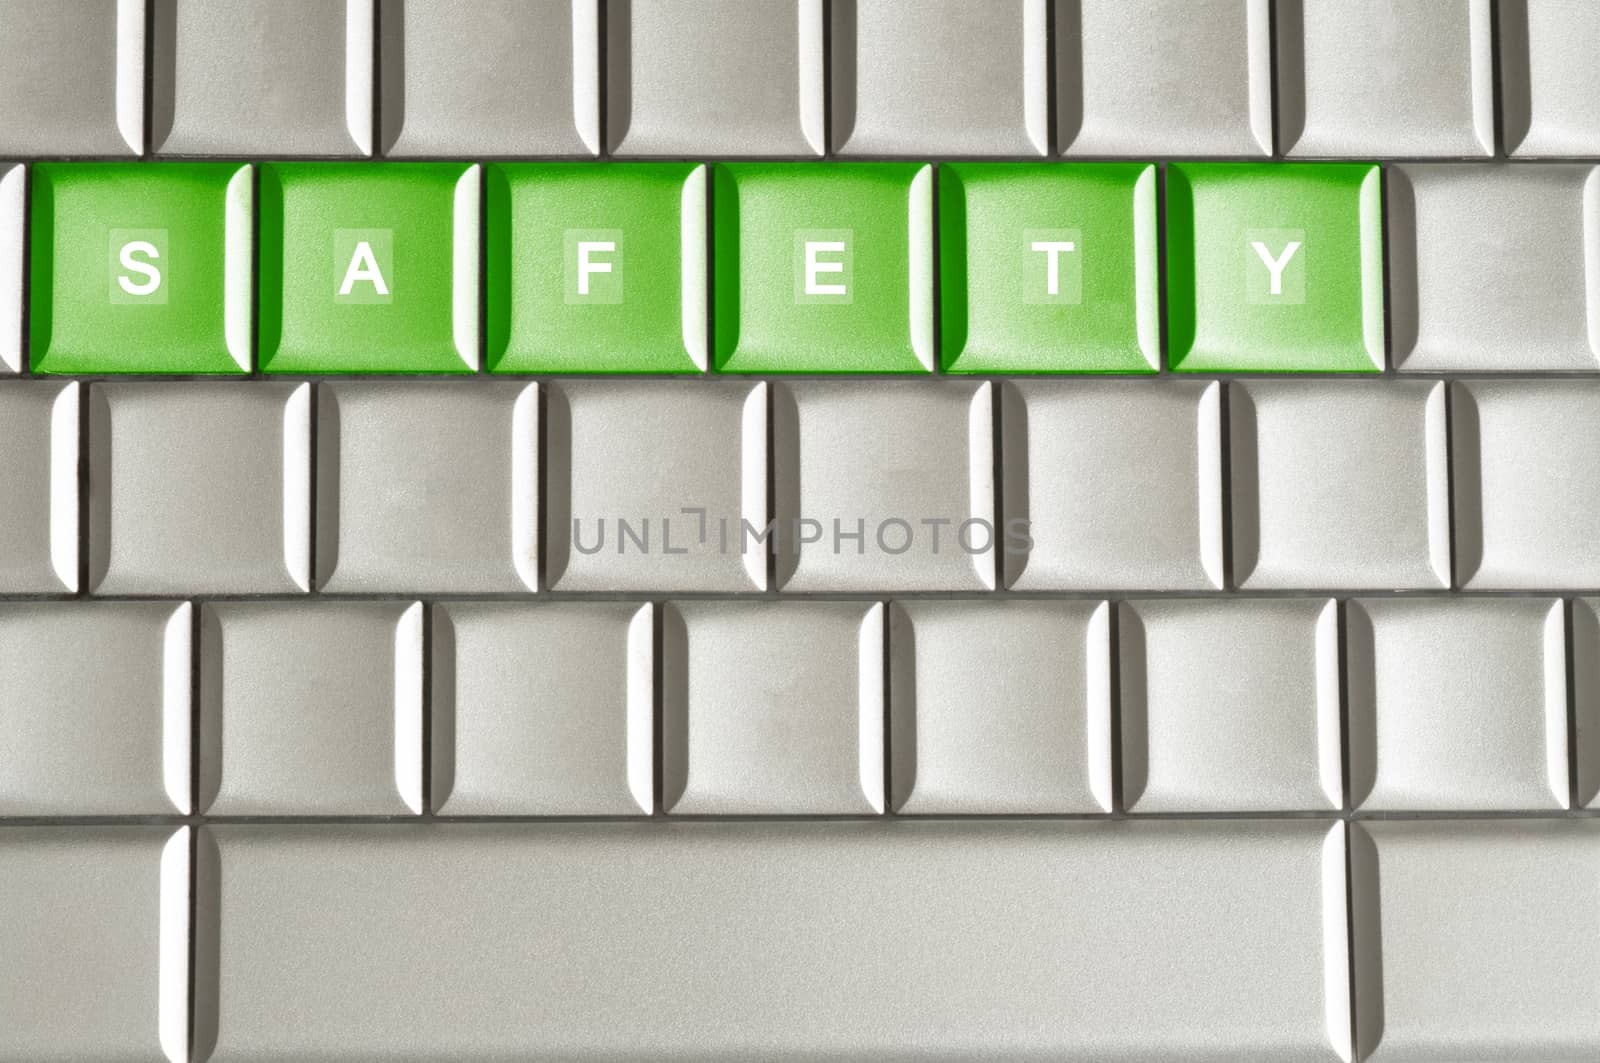 Metallic keyboard with the word SAFETY by daoleduc